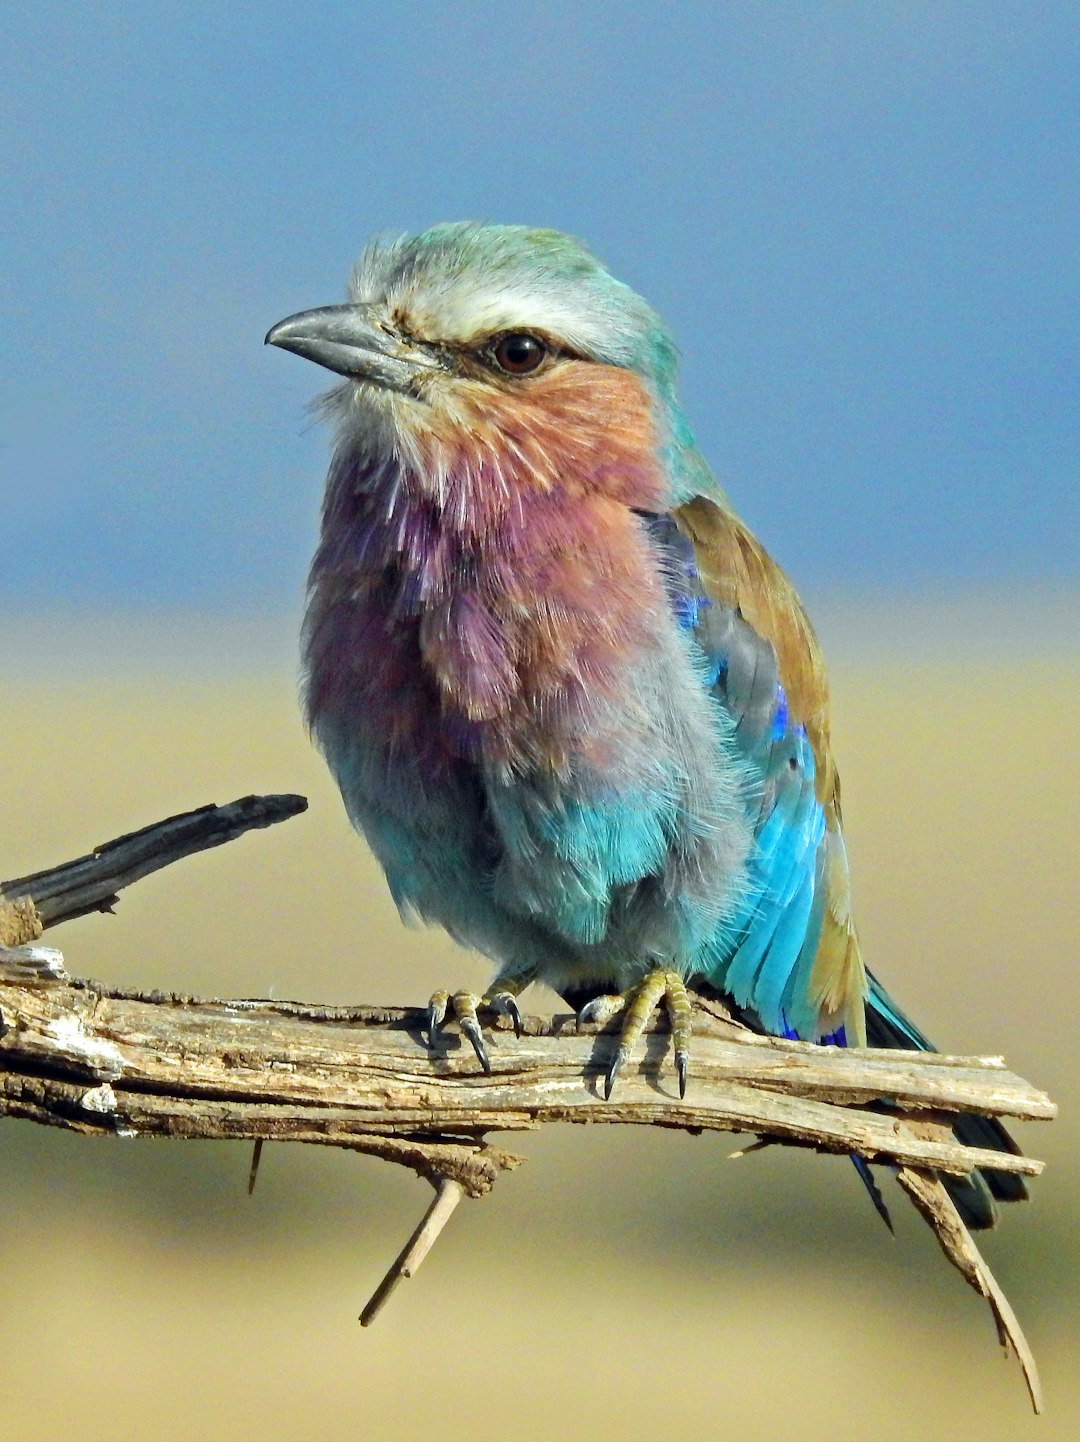 Lilac-breasted Roller. I think the Lilac-breasted Roller is one of Africa’s most beautiful birds.